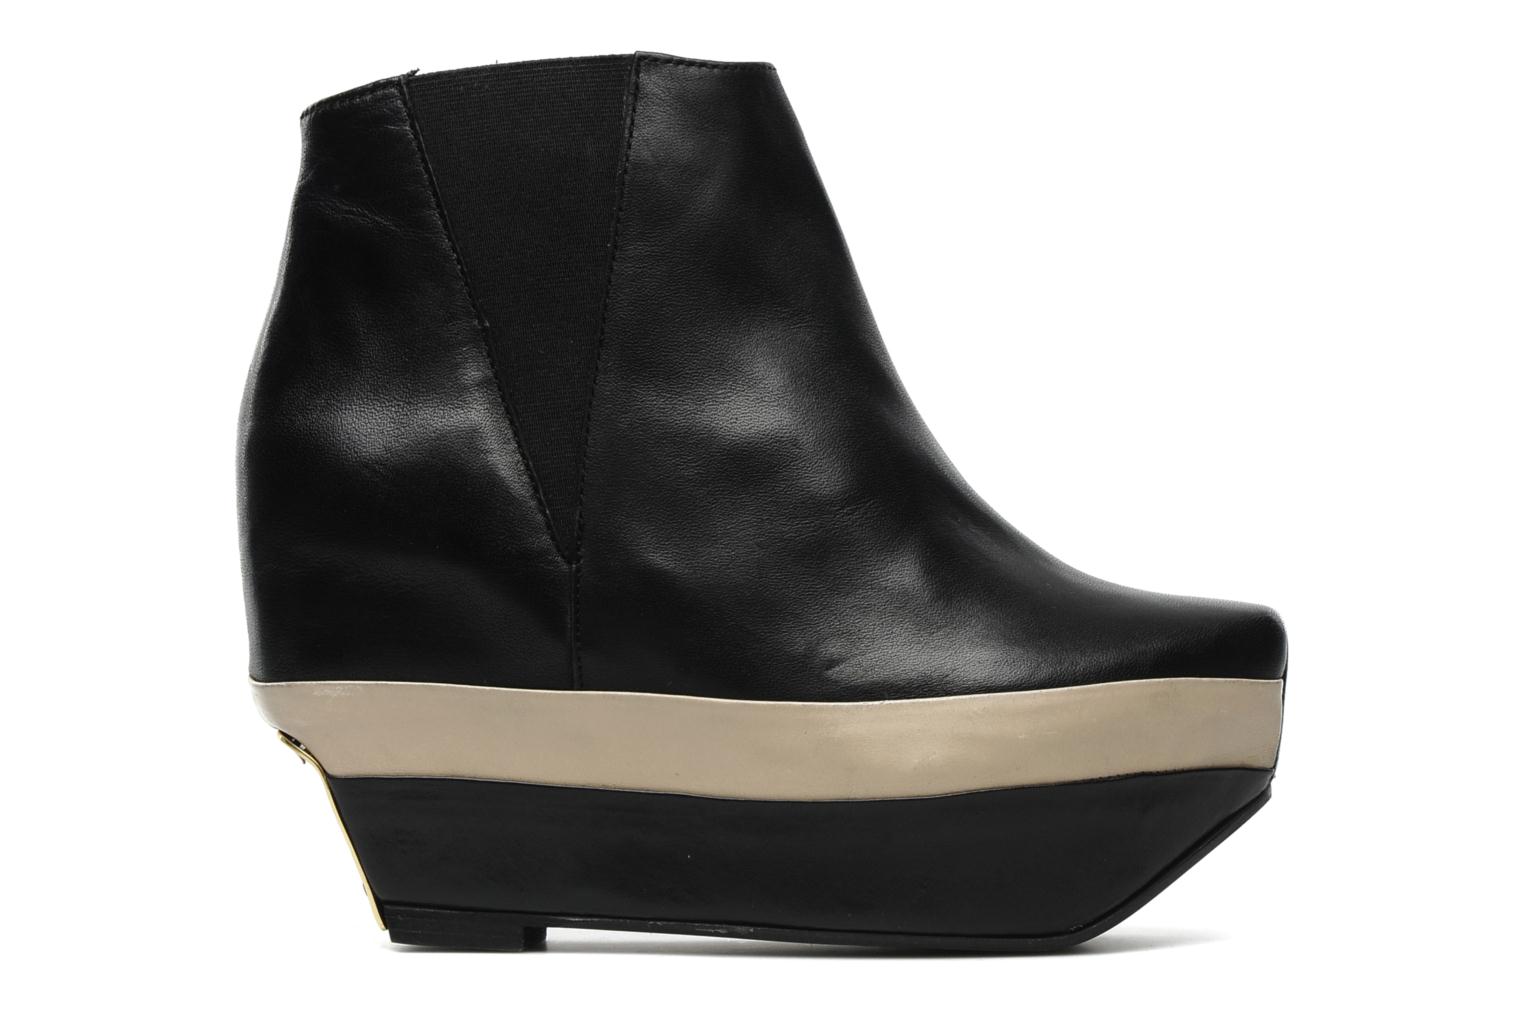 Miista RIBA Ankle boots in Black at Sarenza.co.uk (105539)